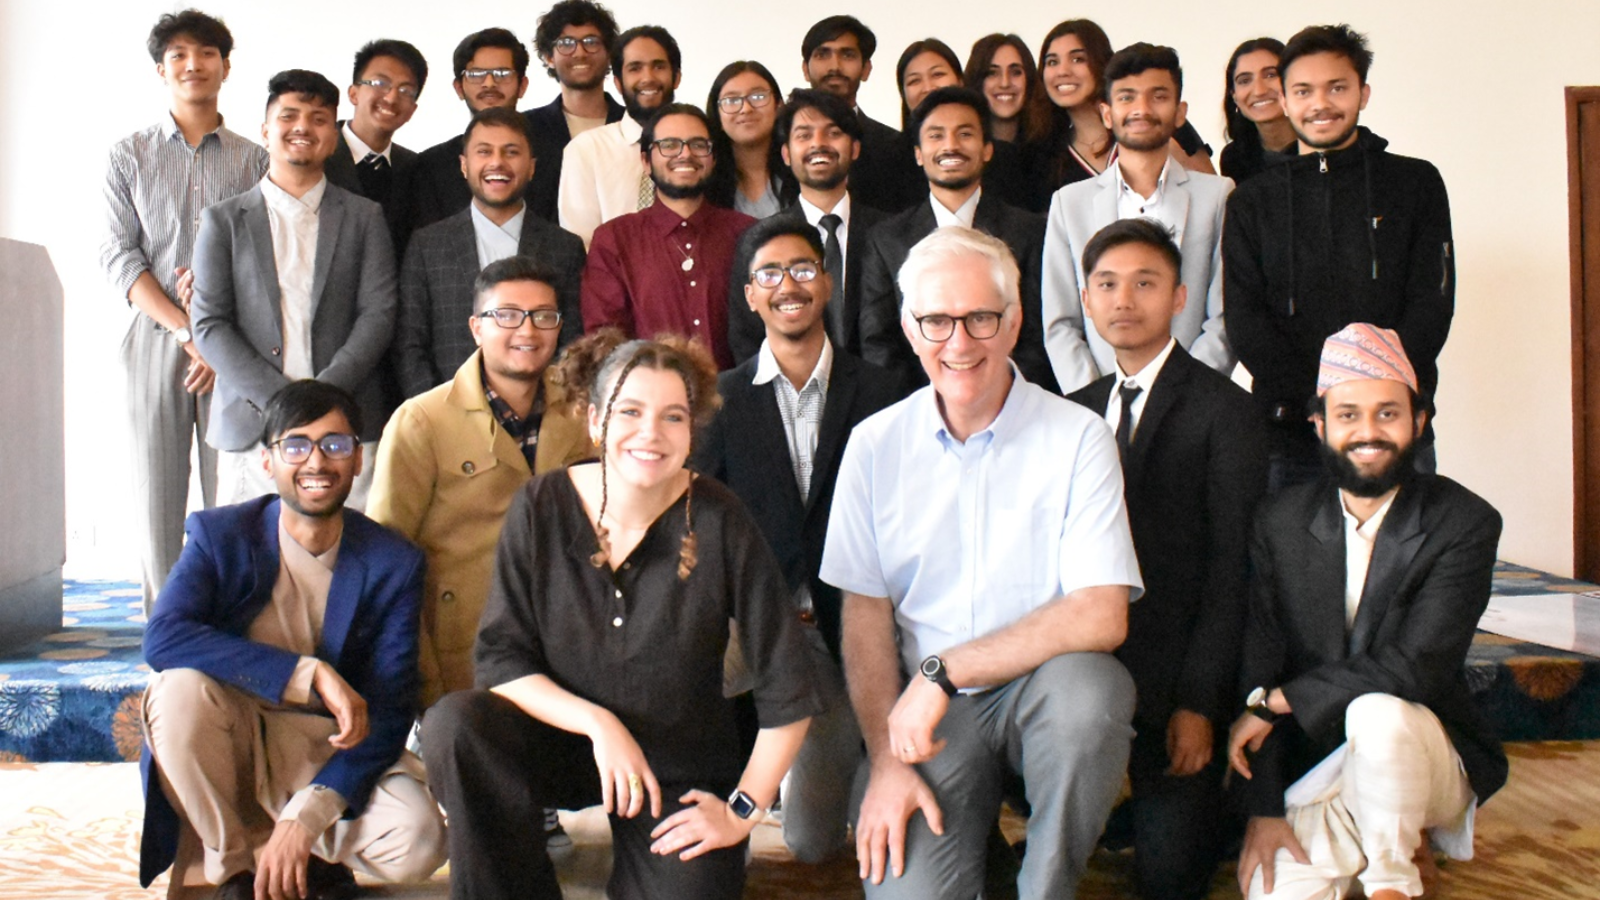 Lau (front left in black) and Gavin (front right in white) in March 2023 at the Kathmandu Geohazard Early Warning Research Symposium, held in Nepal. Lau organized the symposium to celebrate the team’s international partnership and research.